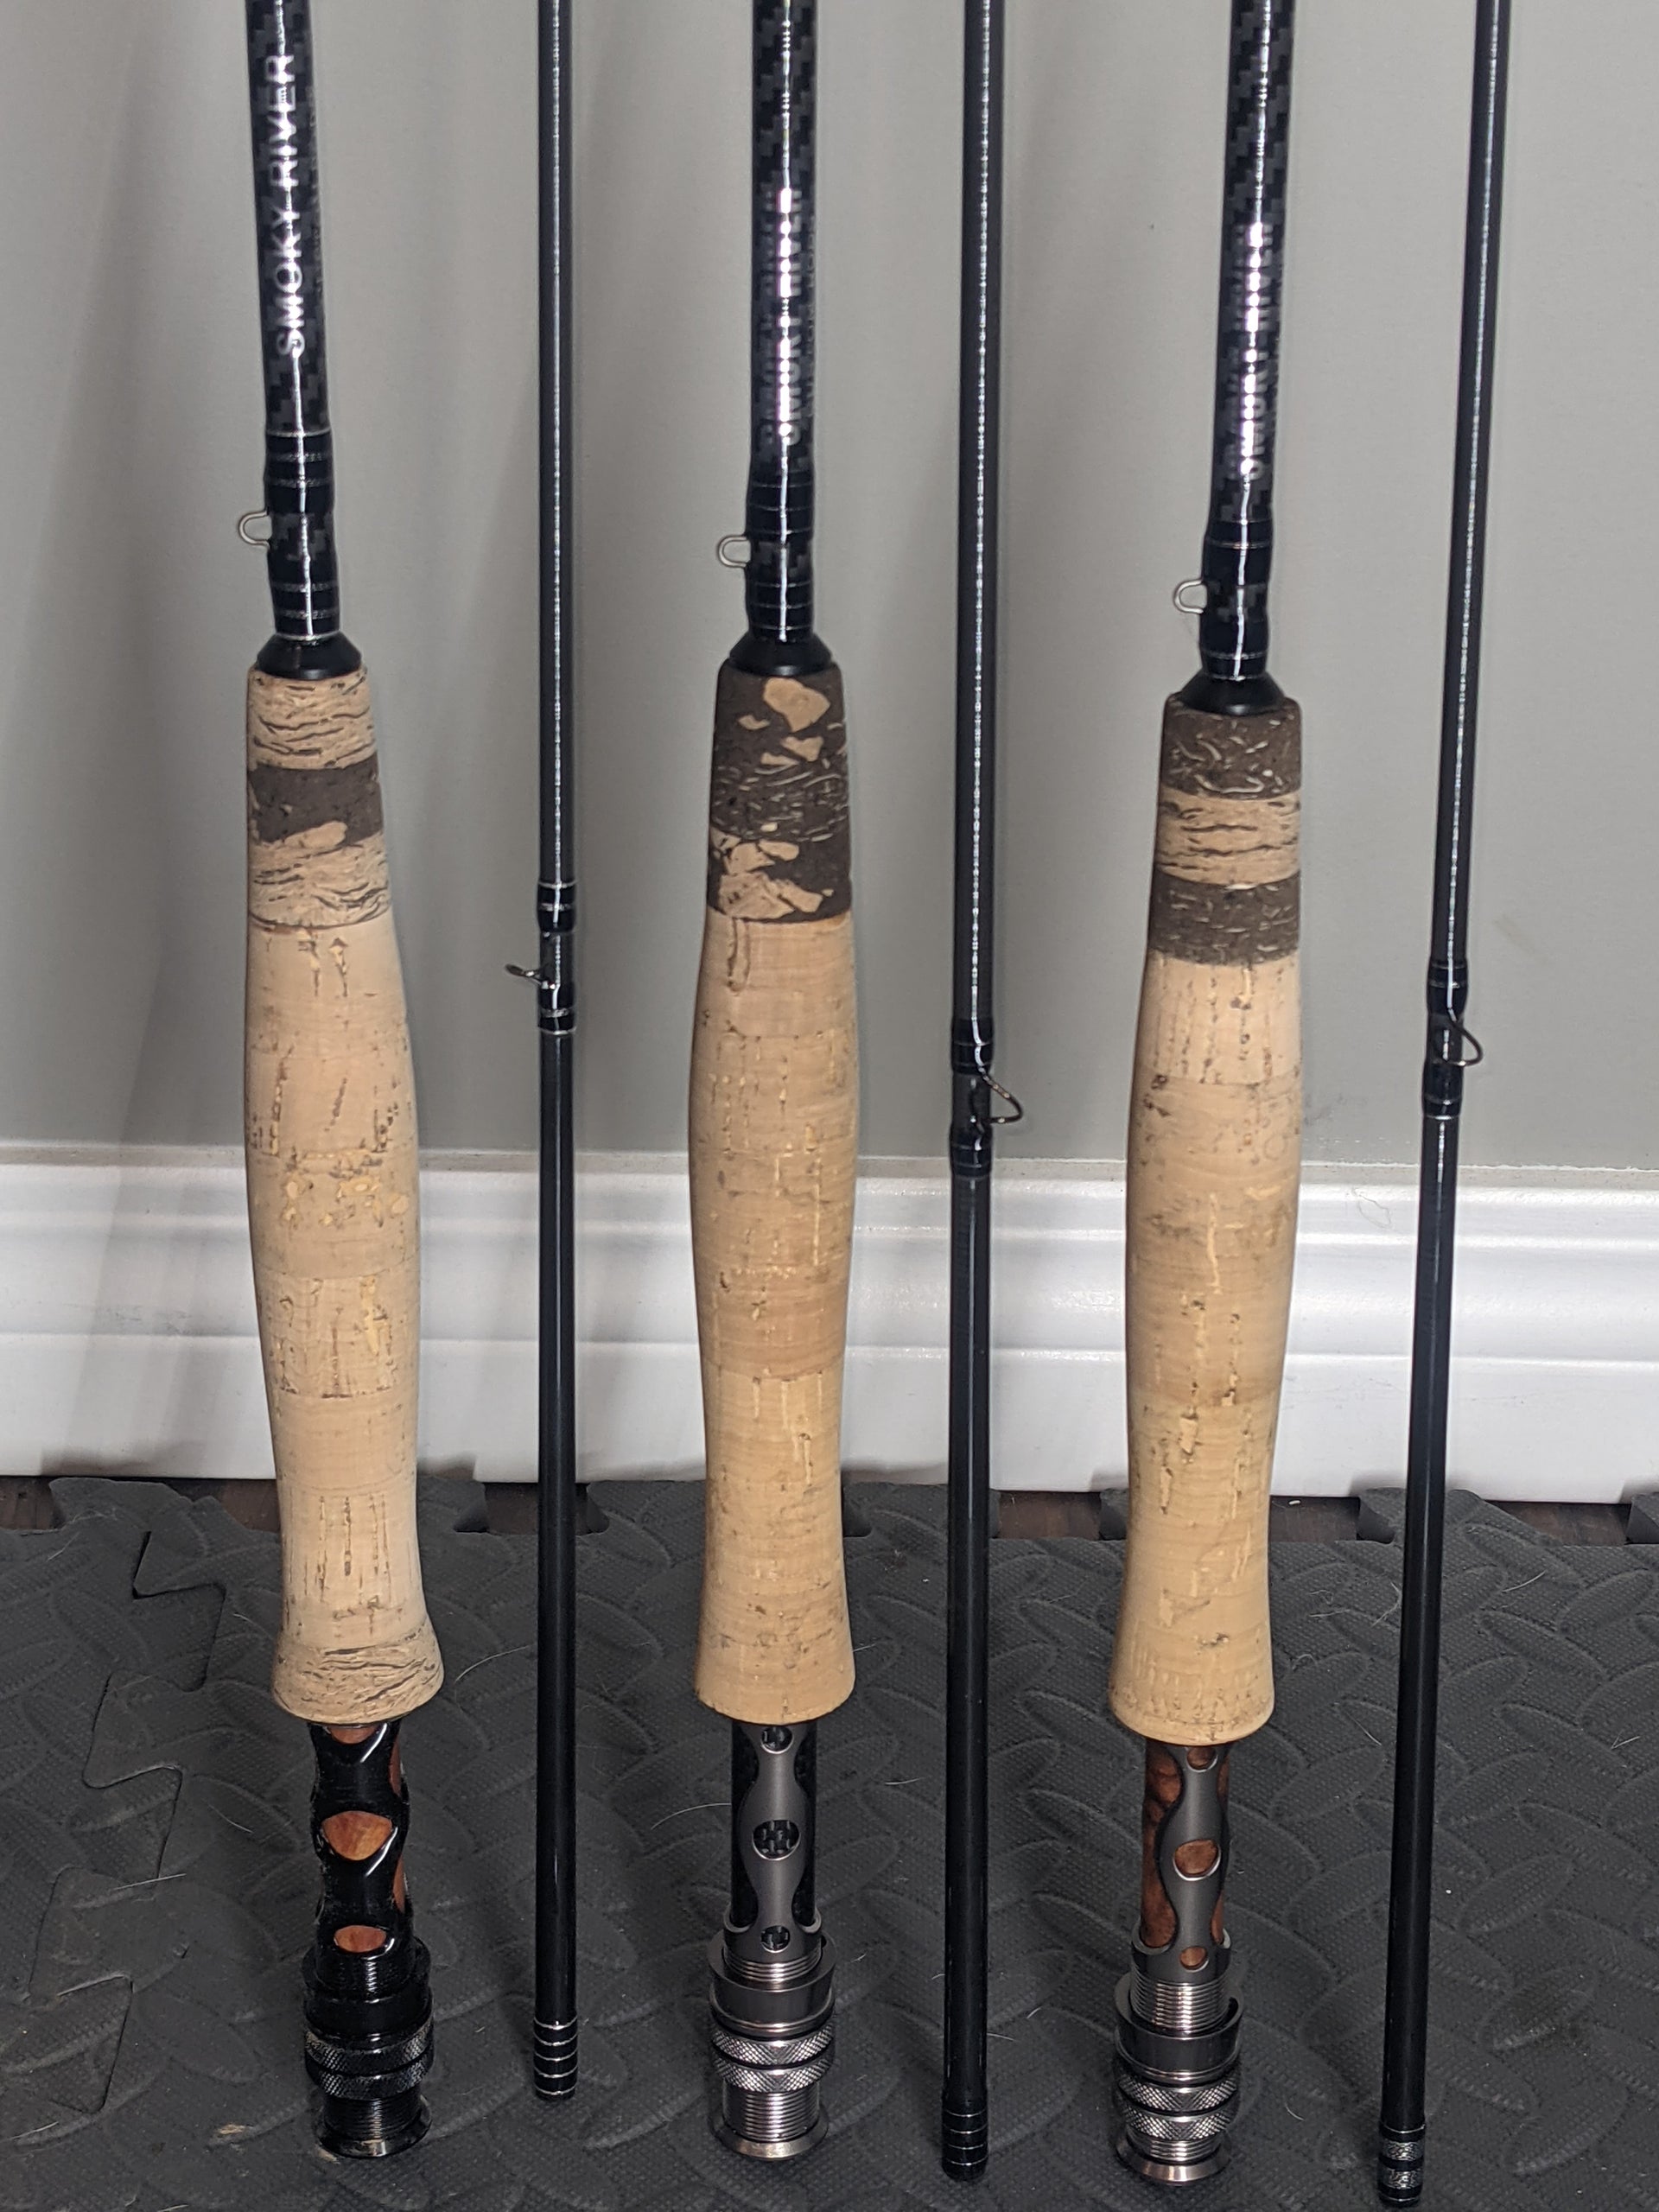 9'0 6WT Eternity ETEF906-4CB Fly Rod Blank – Smoky River Custom Rods and  Supplies